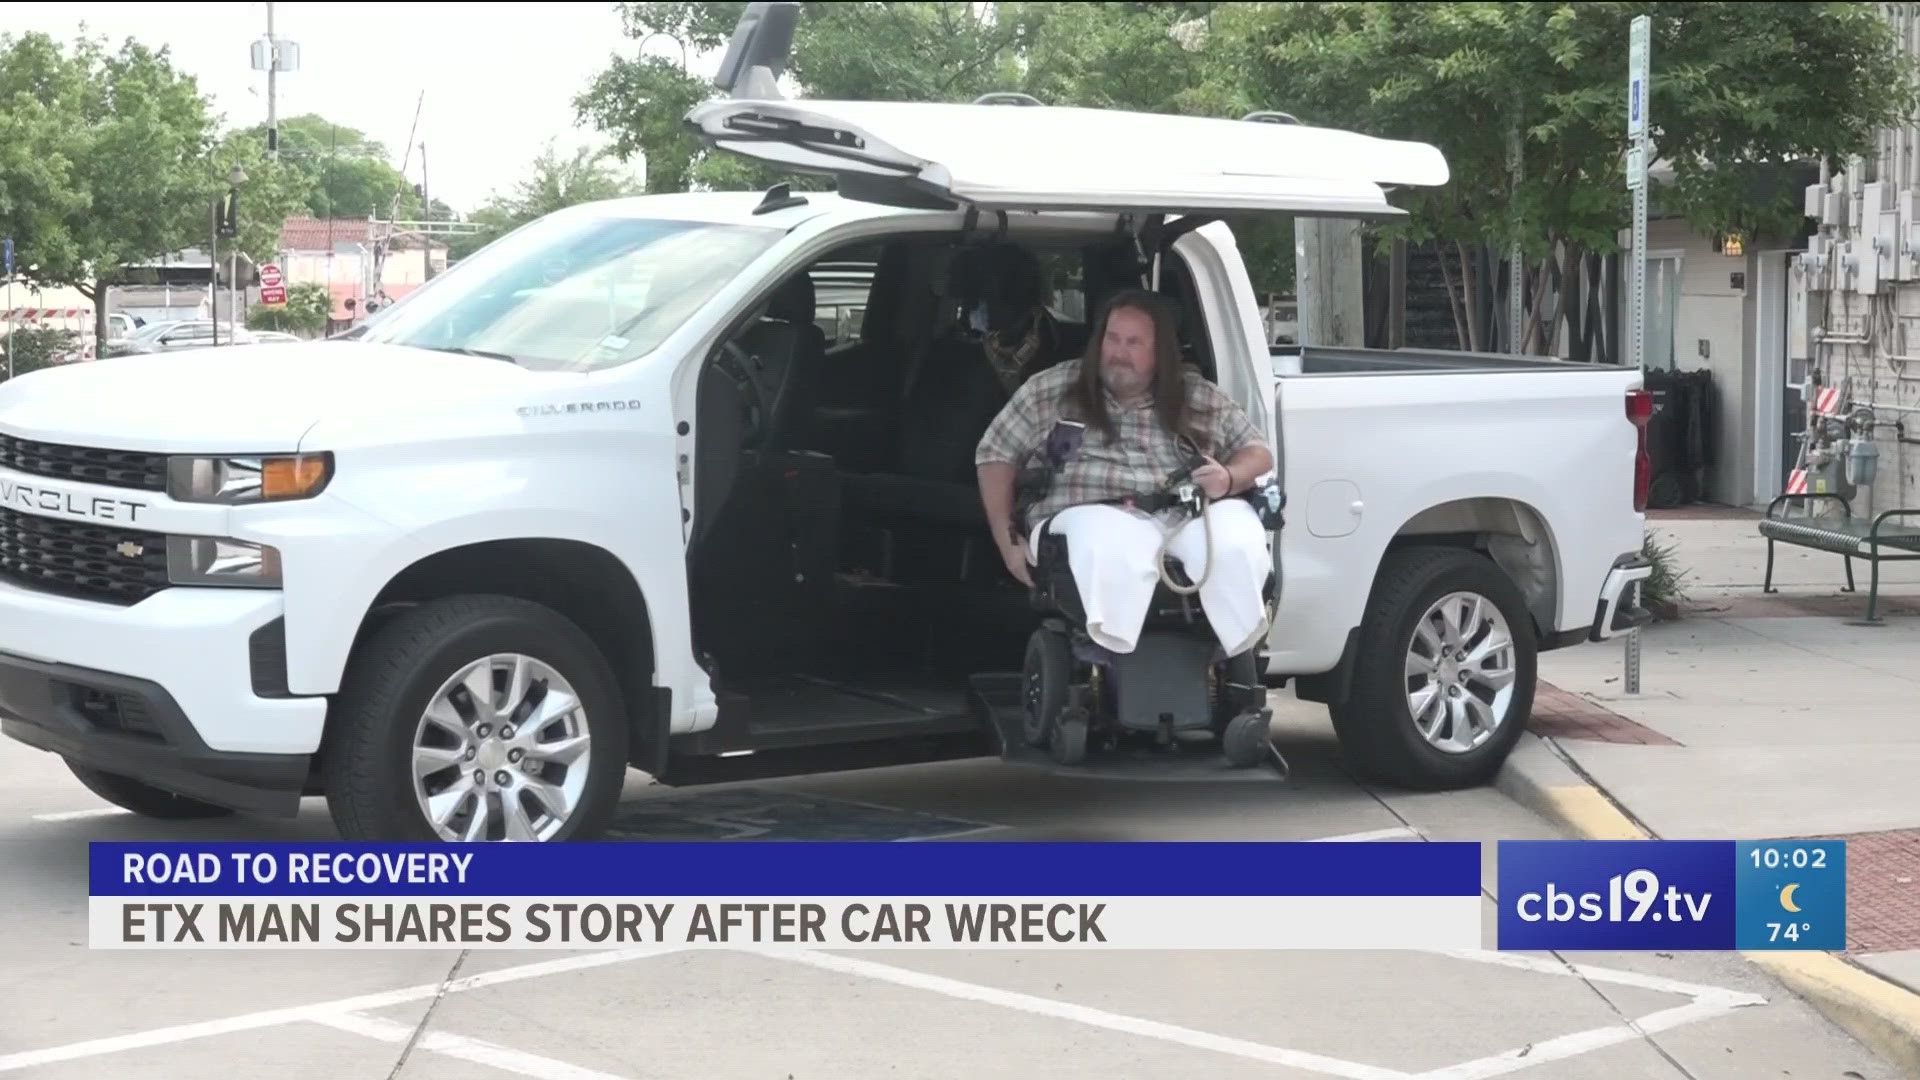 Nathan Davis lost both of his legs after a crash back in April 2018. Today, he's fully independent thanks to several members of his community.